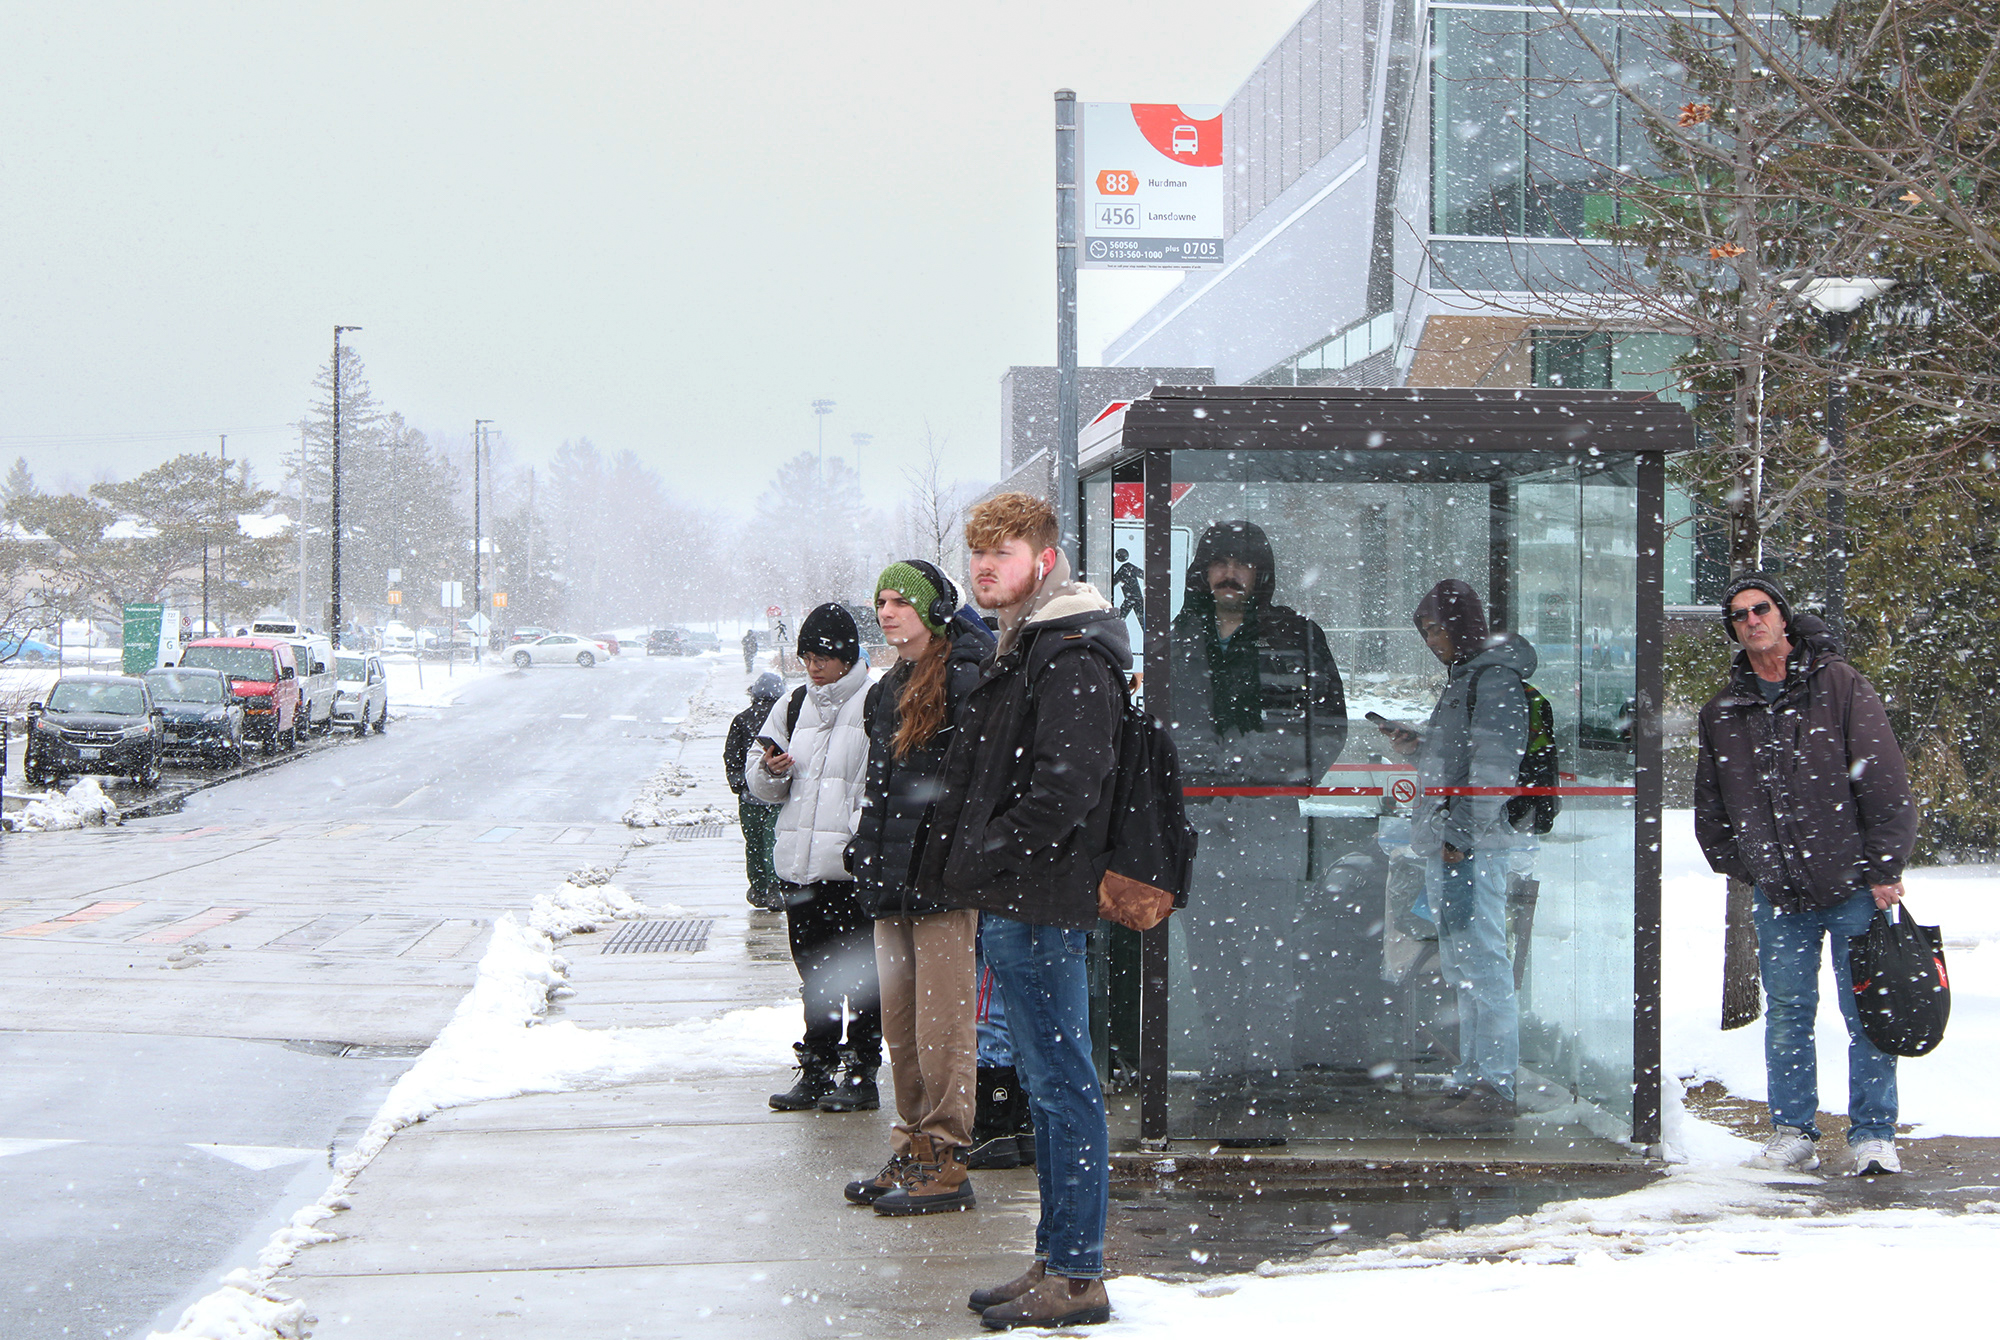 A group of students is waiting for the 88 bus under heavy snow in front of E-building at Algonquin College.